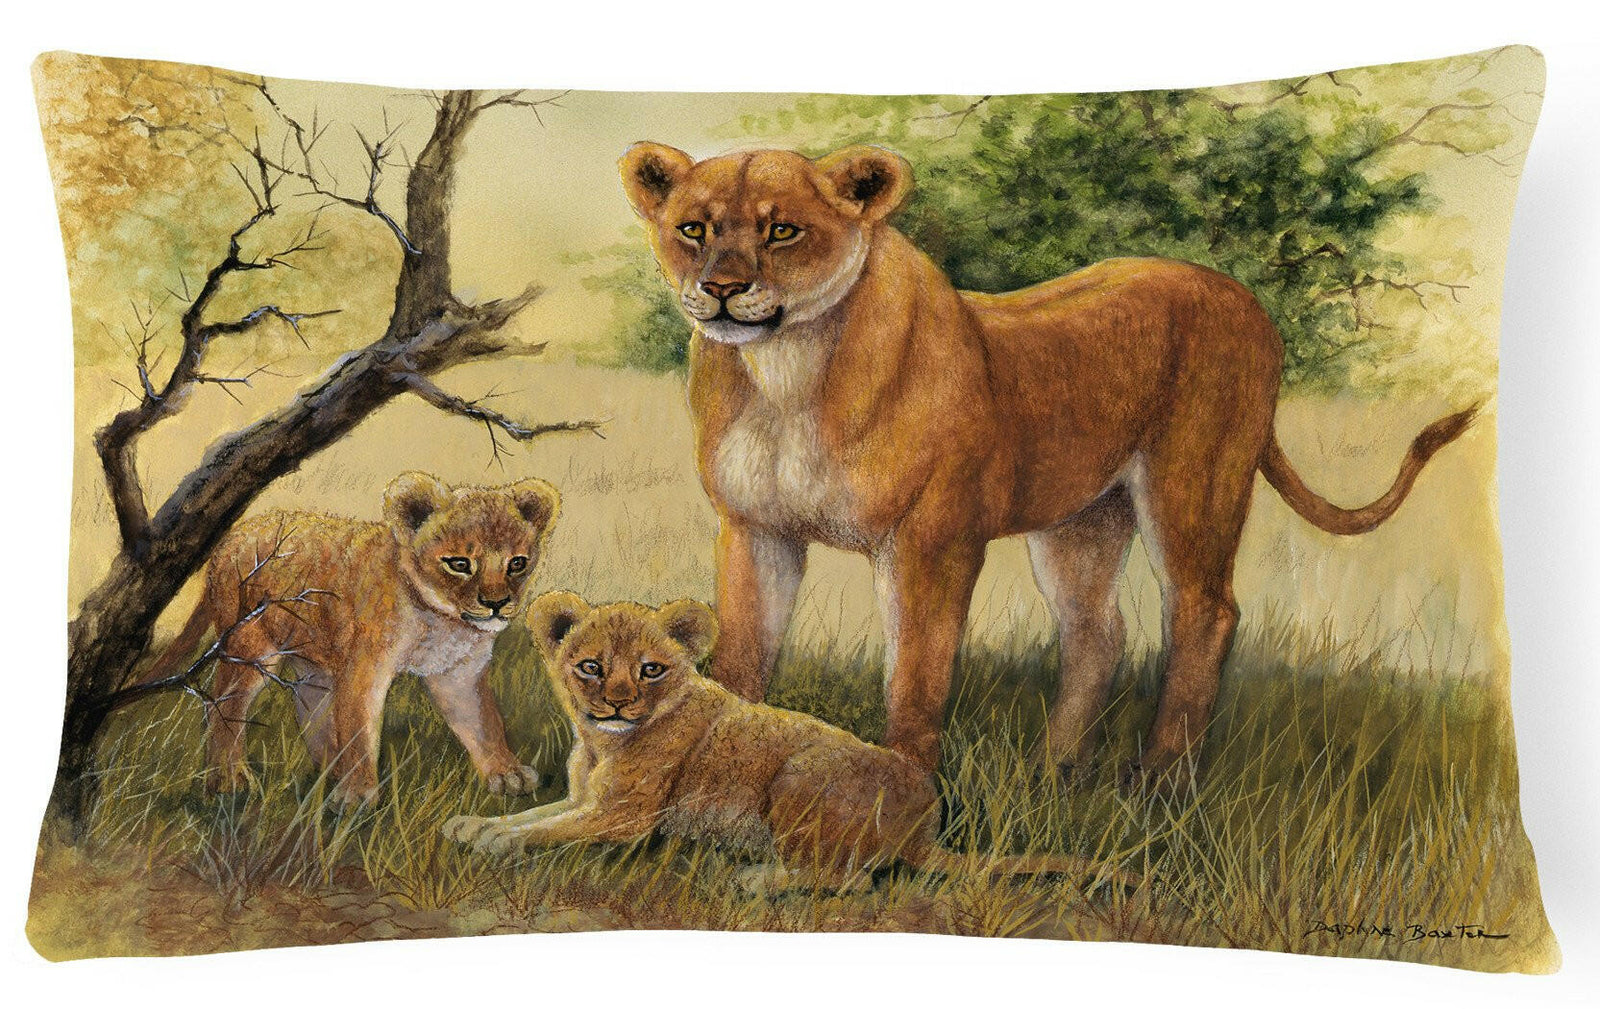 Lion and Cubs by Daphne Baxter Fabric Decorative Pillow BDBA0307PW1216 by Caroline's Treasures